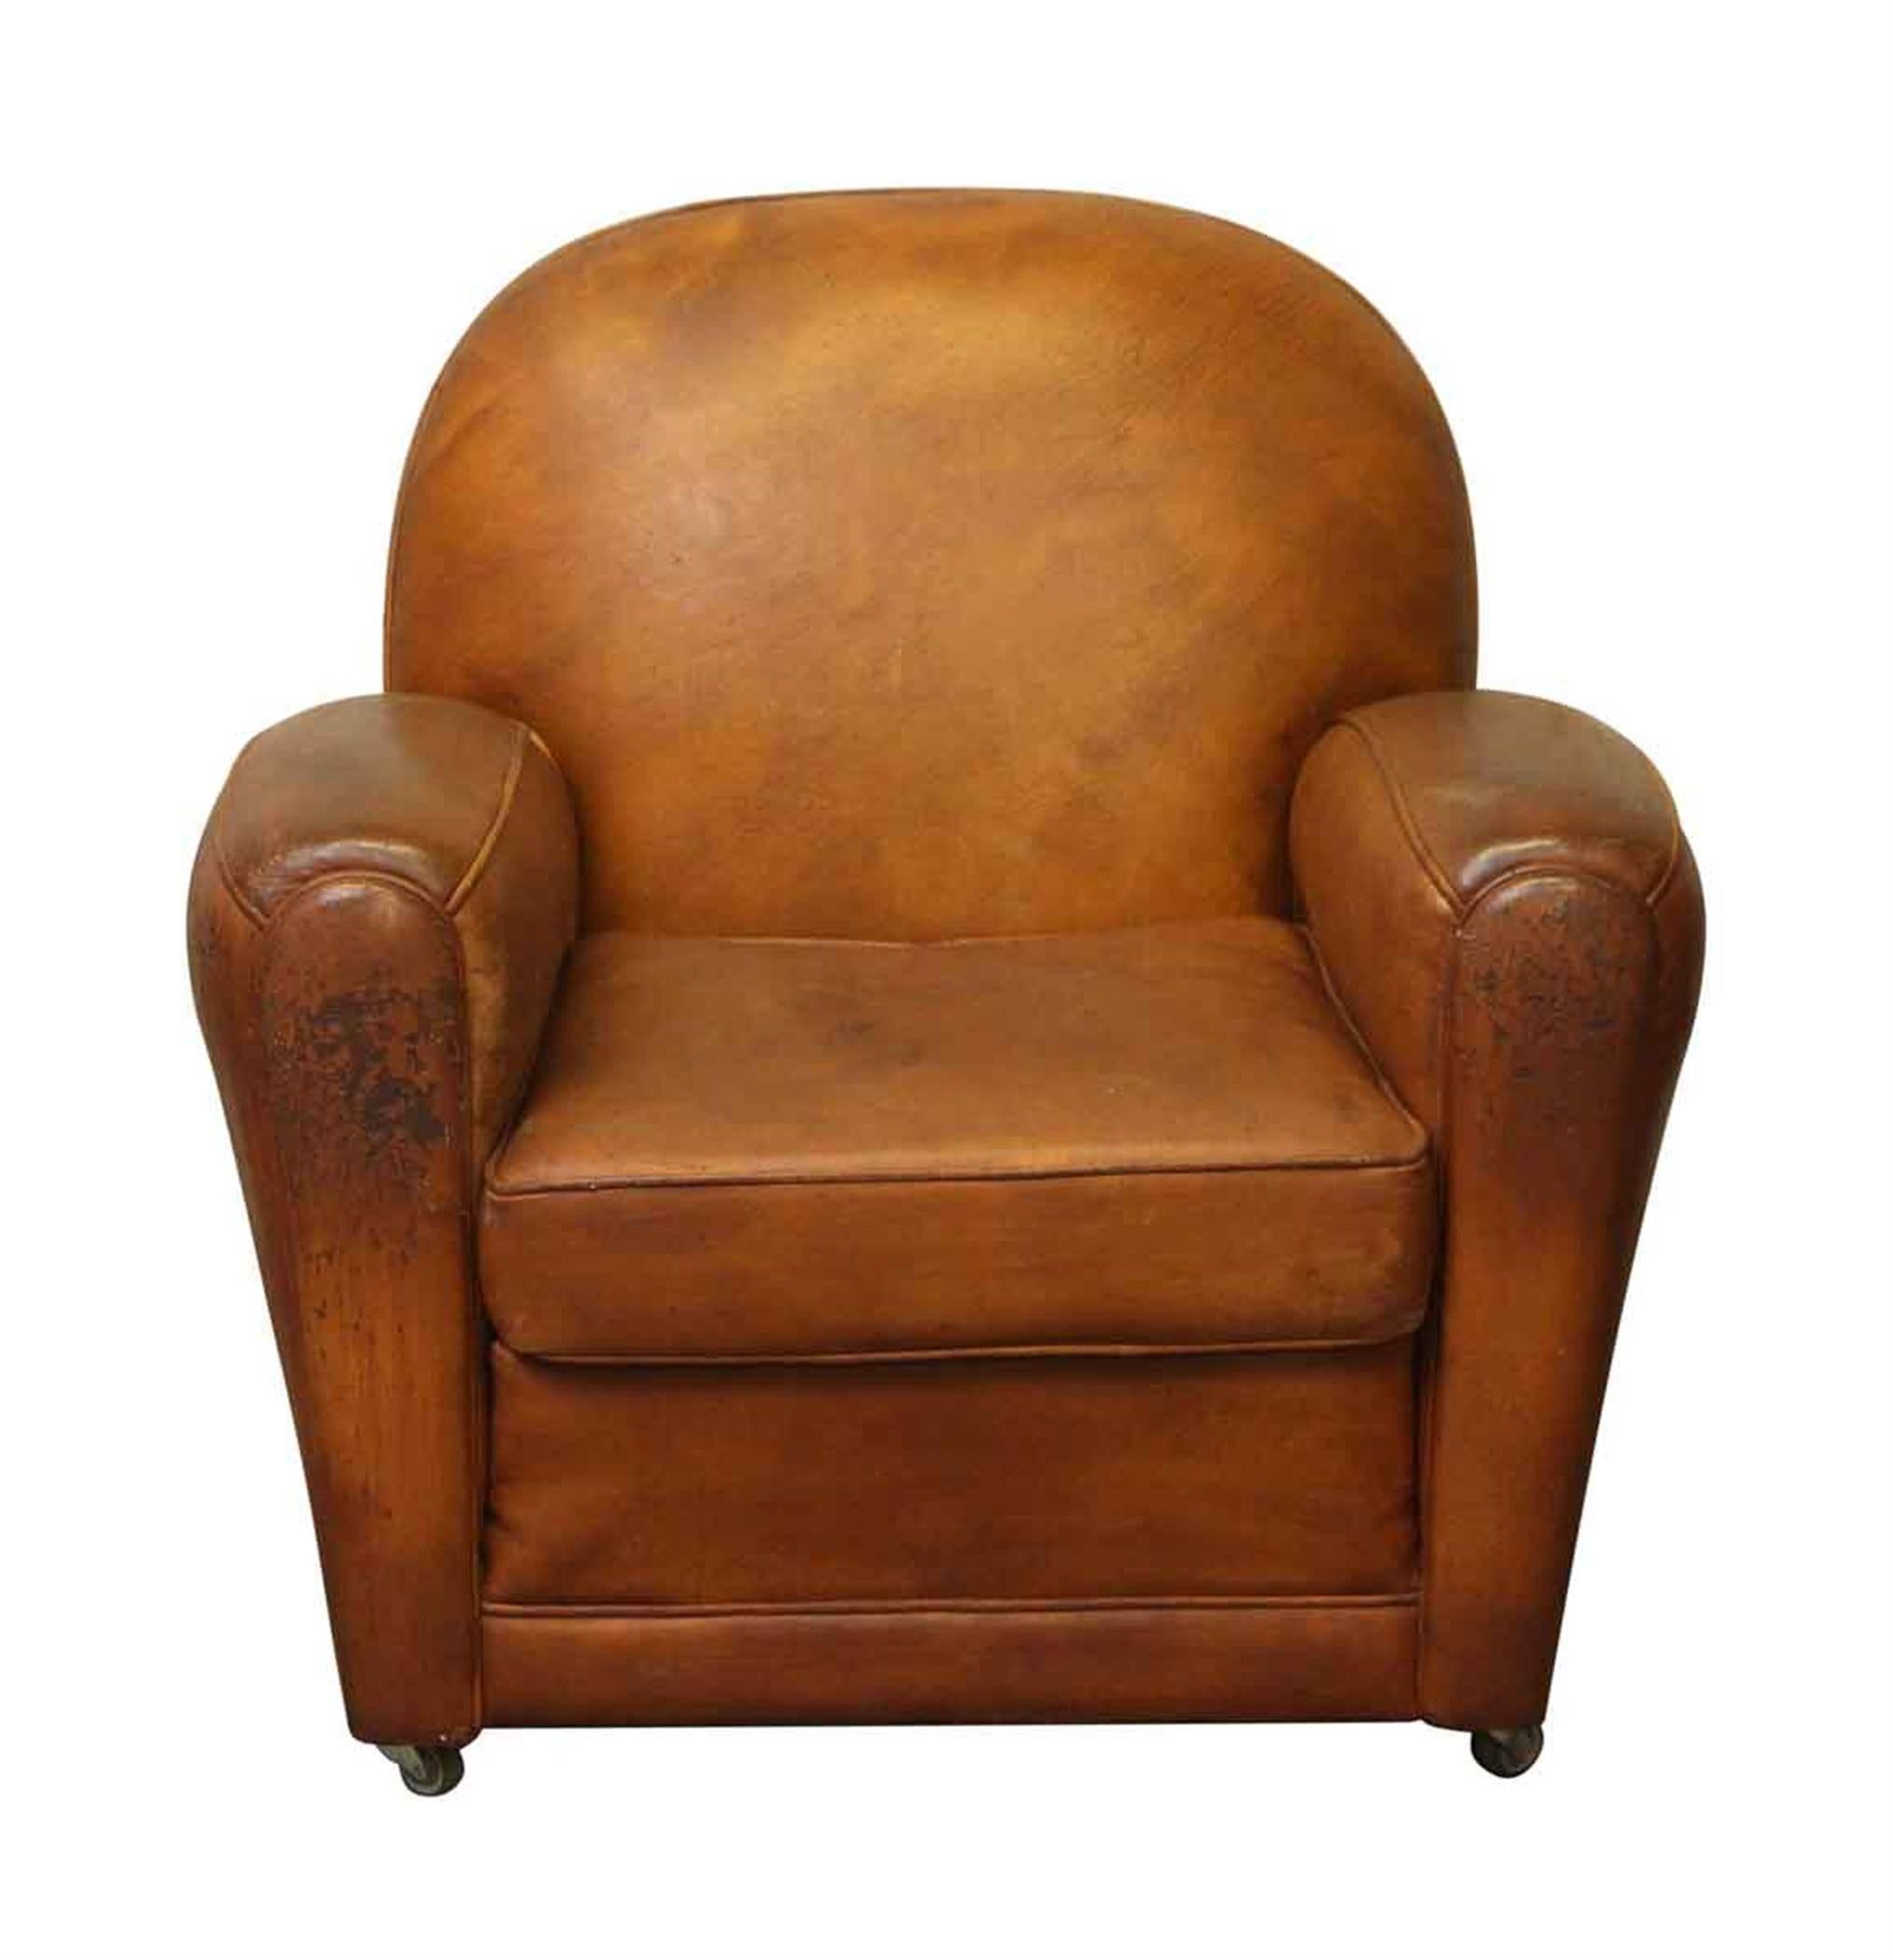 1960s French brown leather club chair with a rounded back and rolling wheels. This can be seen at our 5 East 16th St location on Union Square in Manhattan.